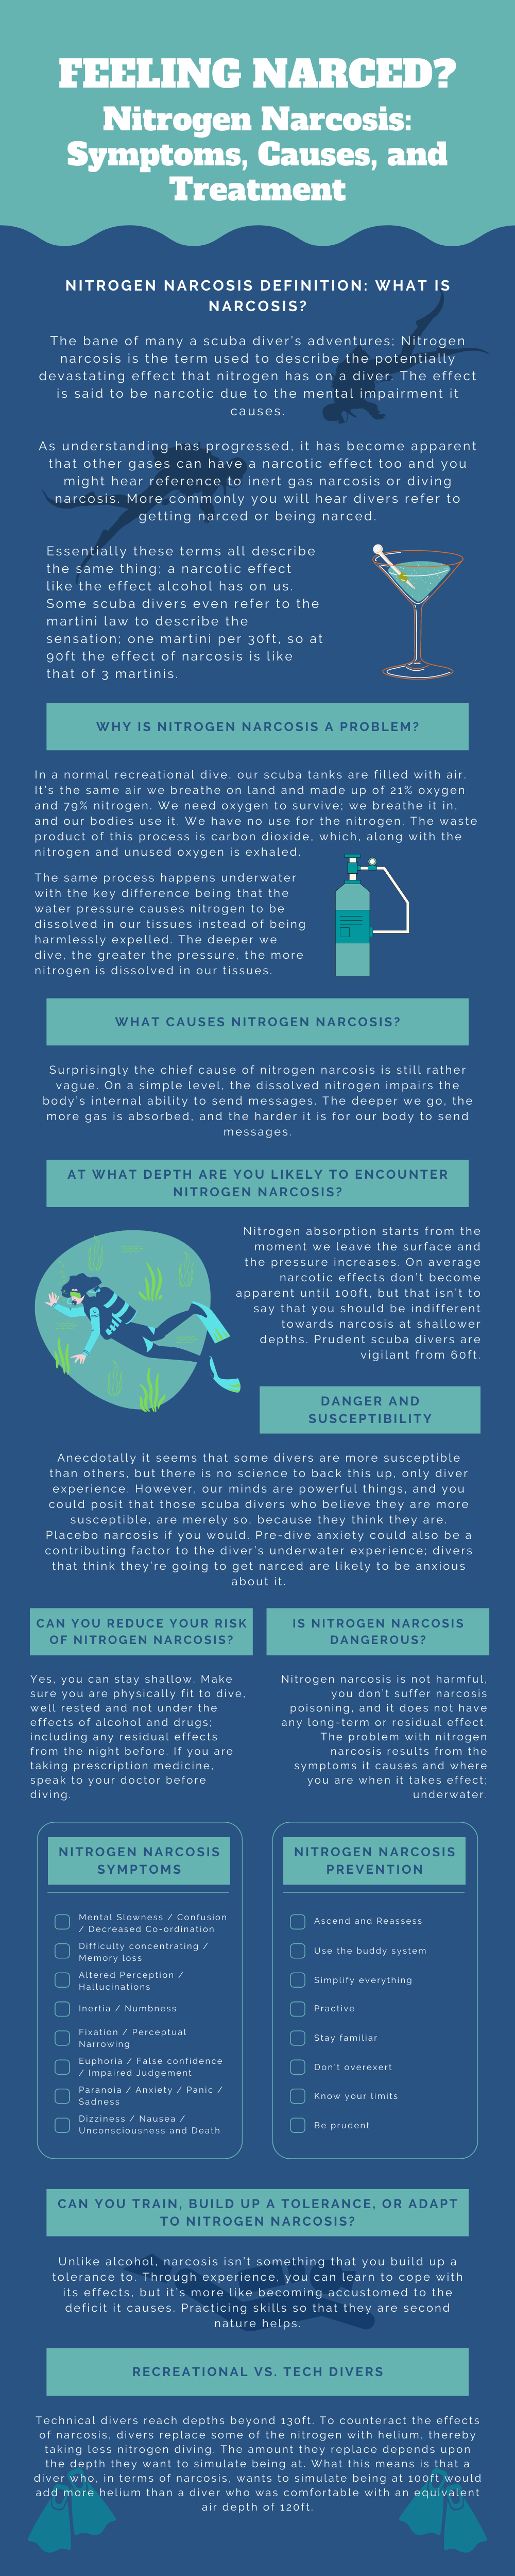 FEELING NARCED NITROGEN NARCOSIS SYMPTOMS, CAUSES, AND TREATMENT